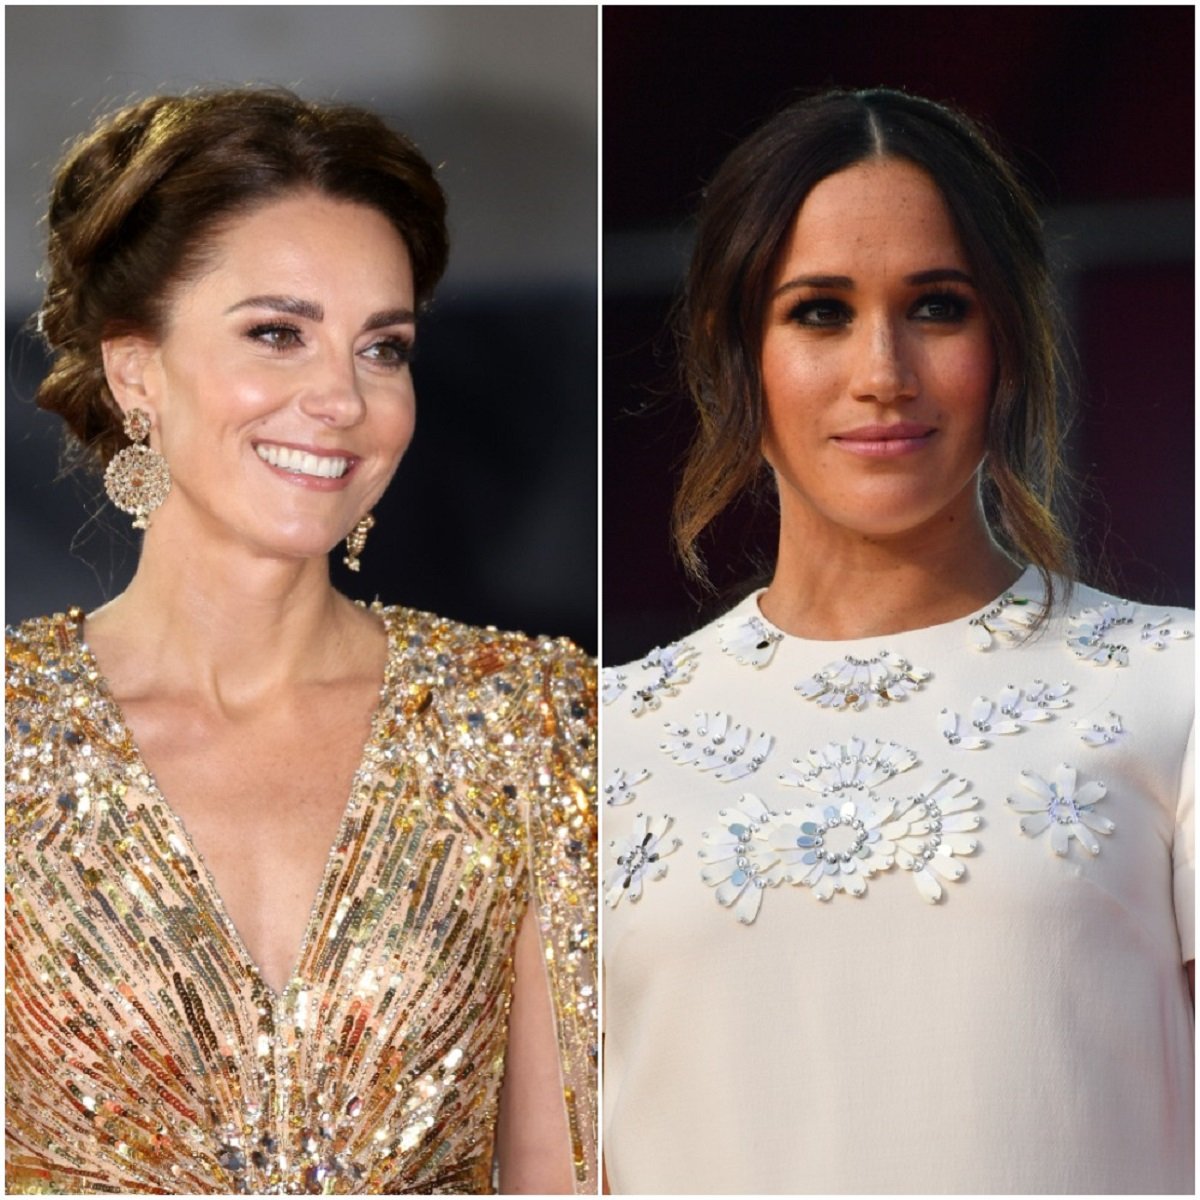 (L) Kate Middleton at the 'No Time To Die' Premiere, (R) Meghan Markle at the Global Citizen Live event in NYC